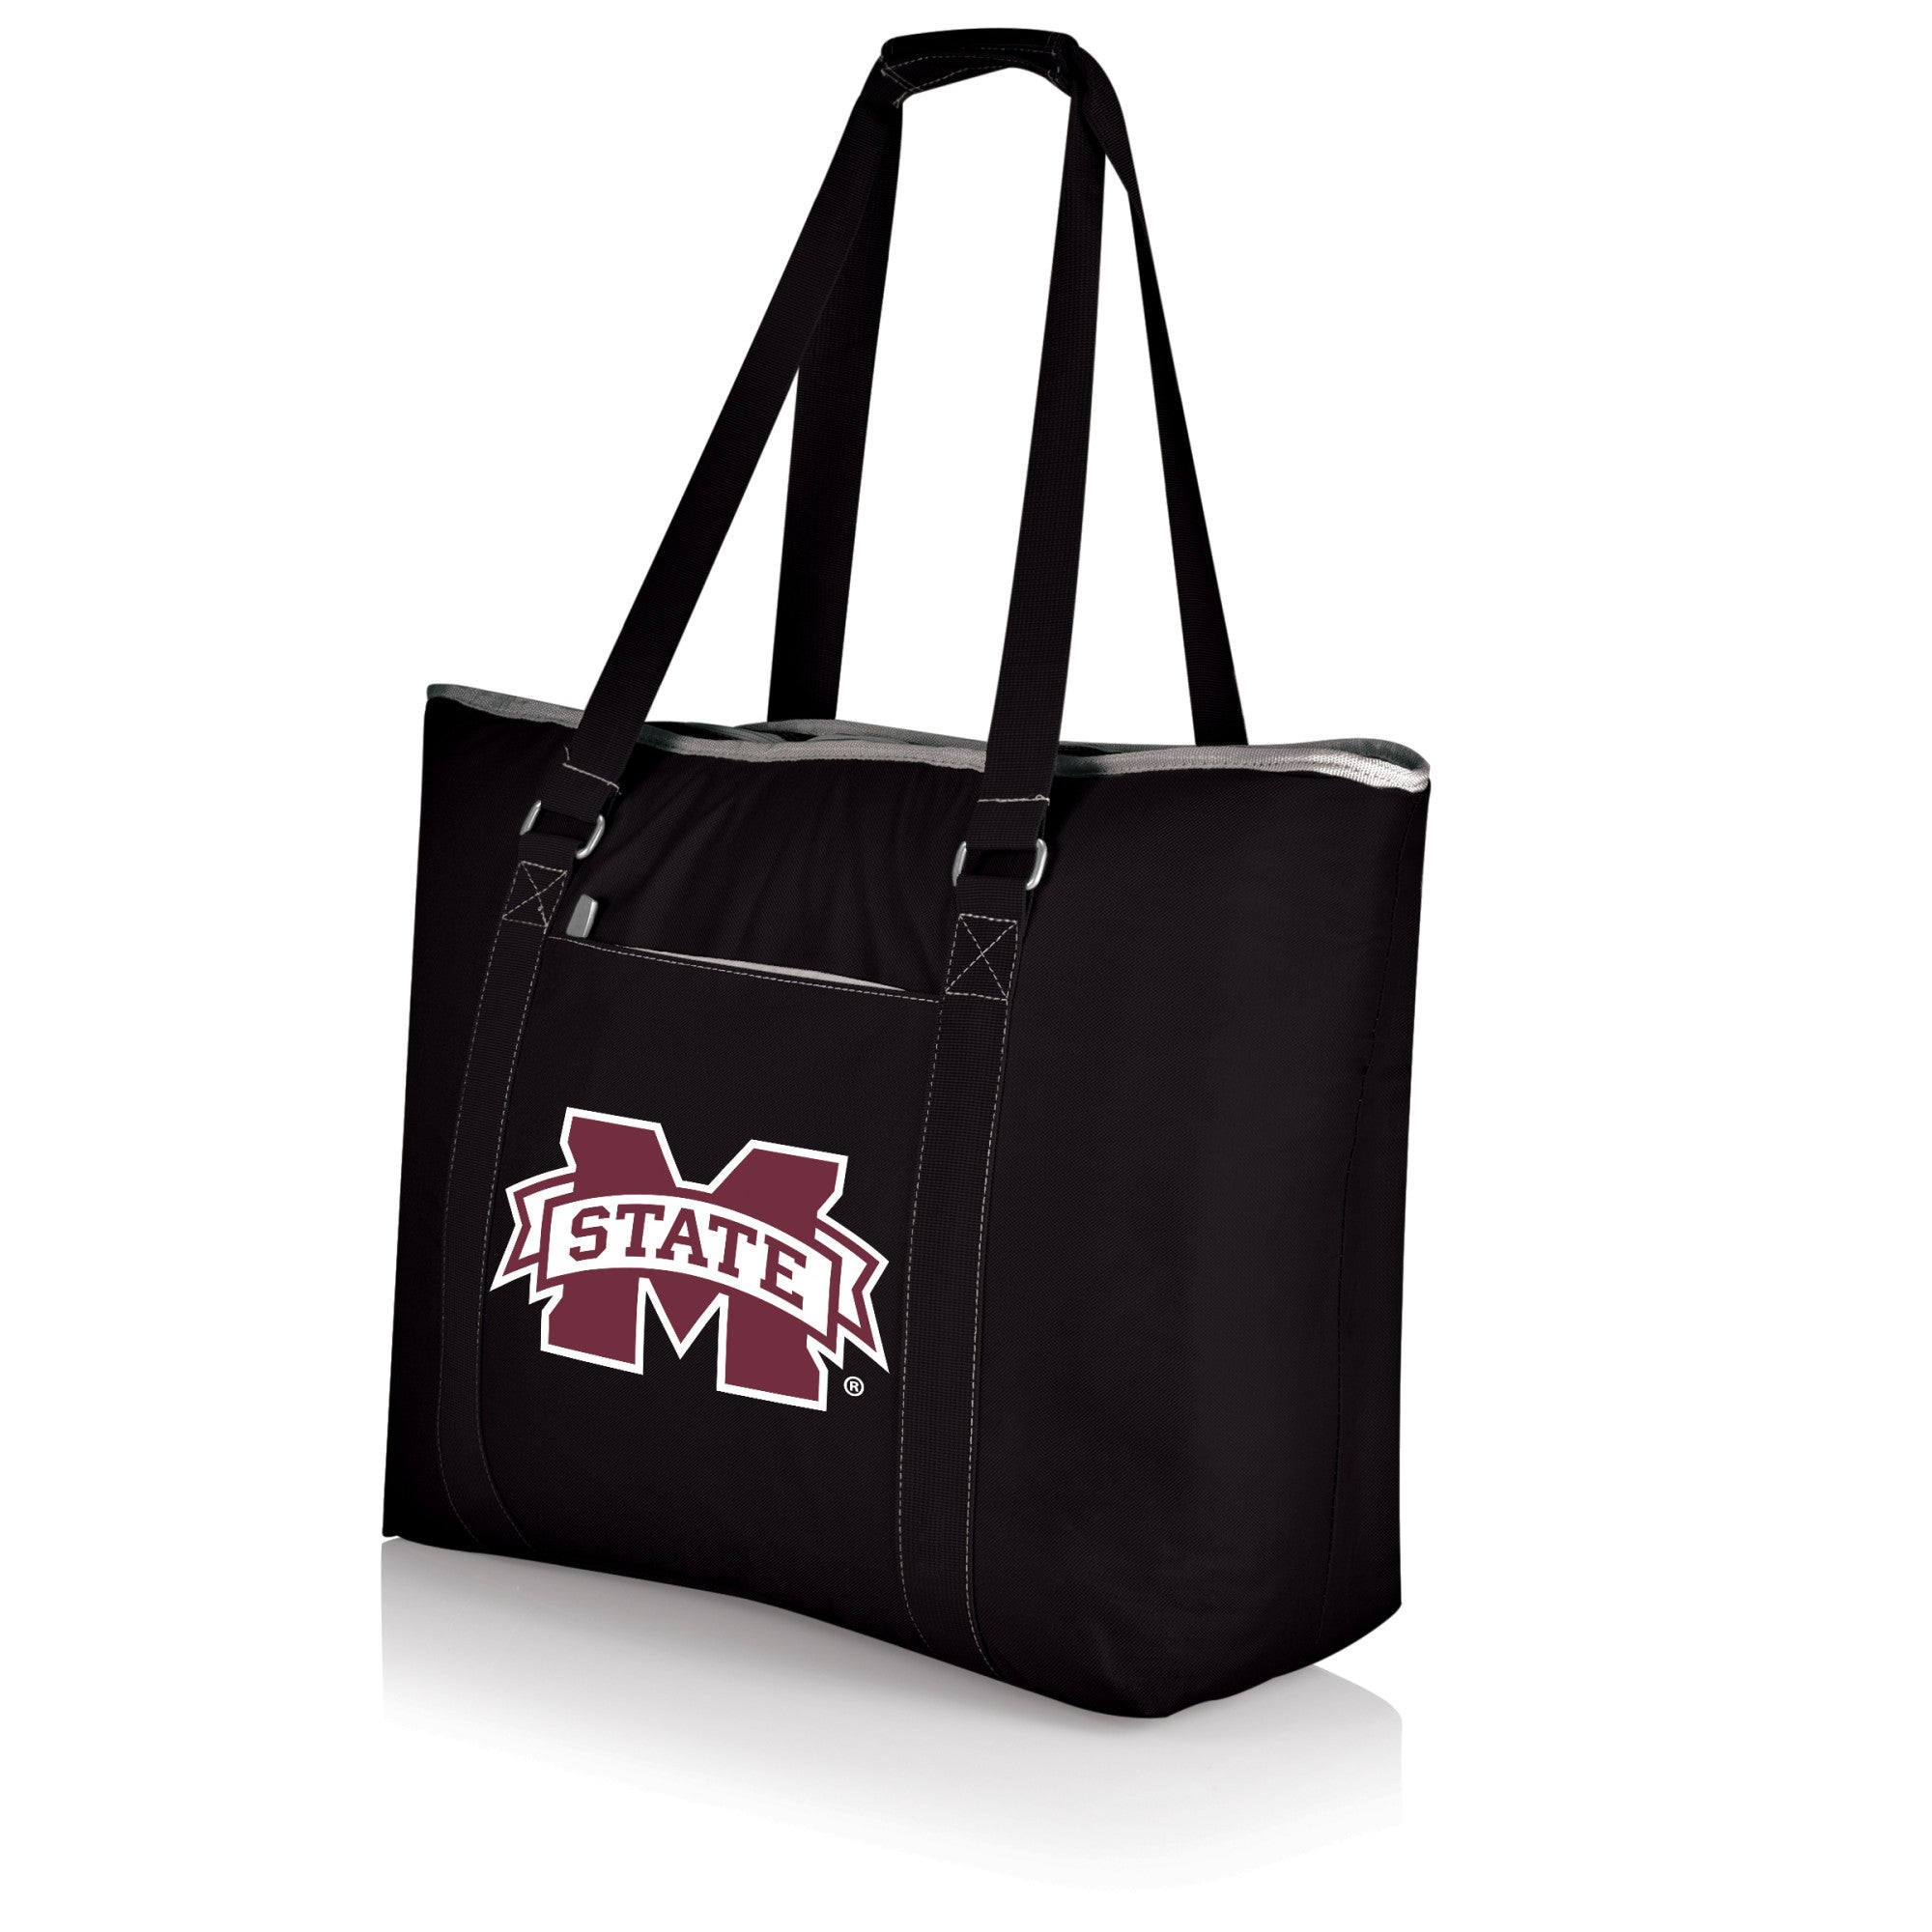 Mississippi State Bulldogs - Tahoe XL Cooler Tote Bag